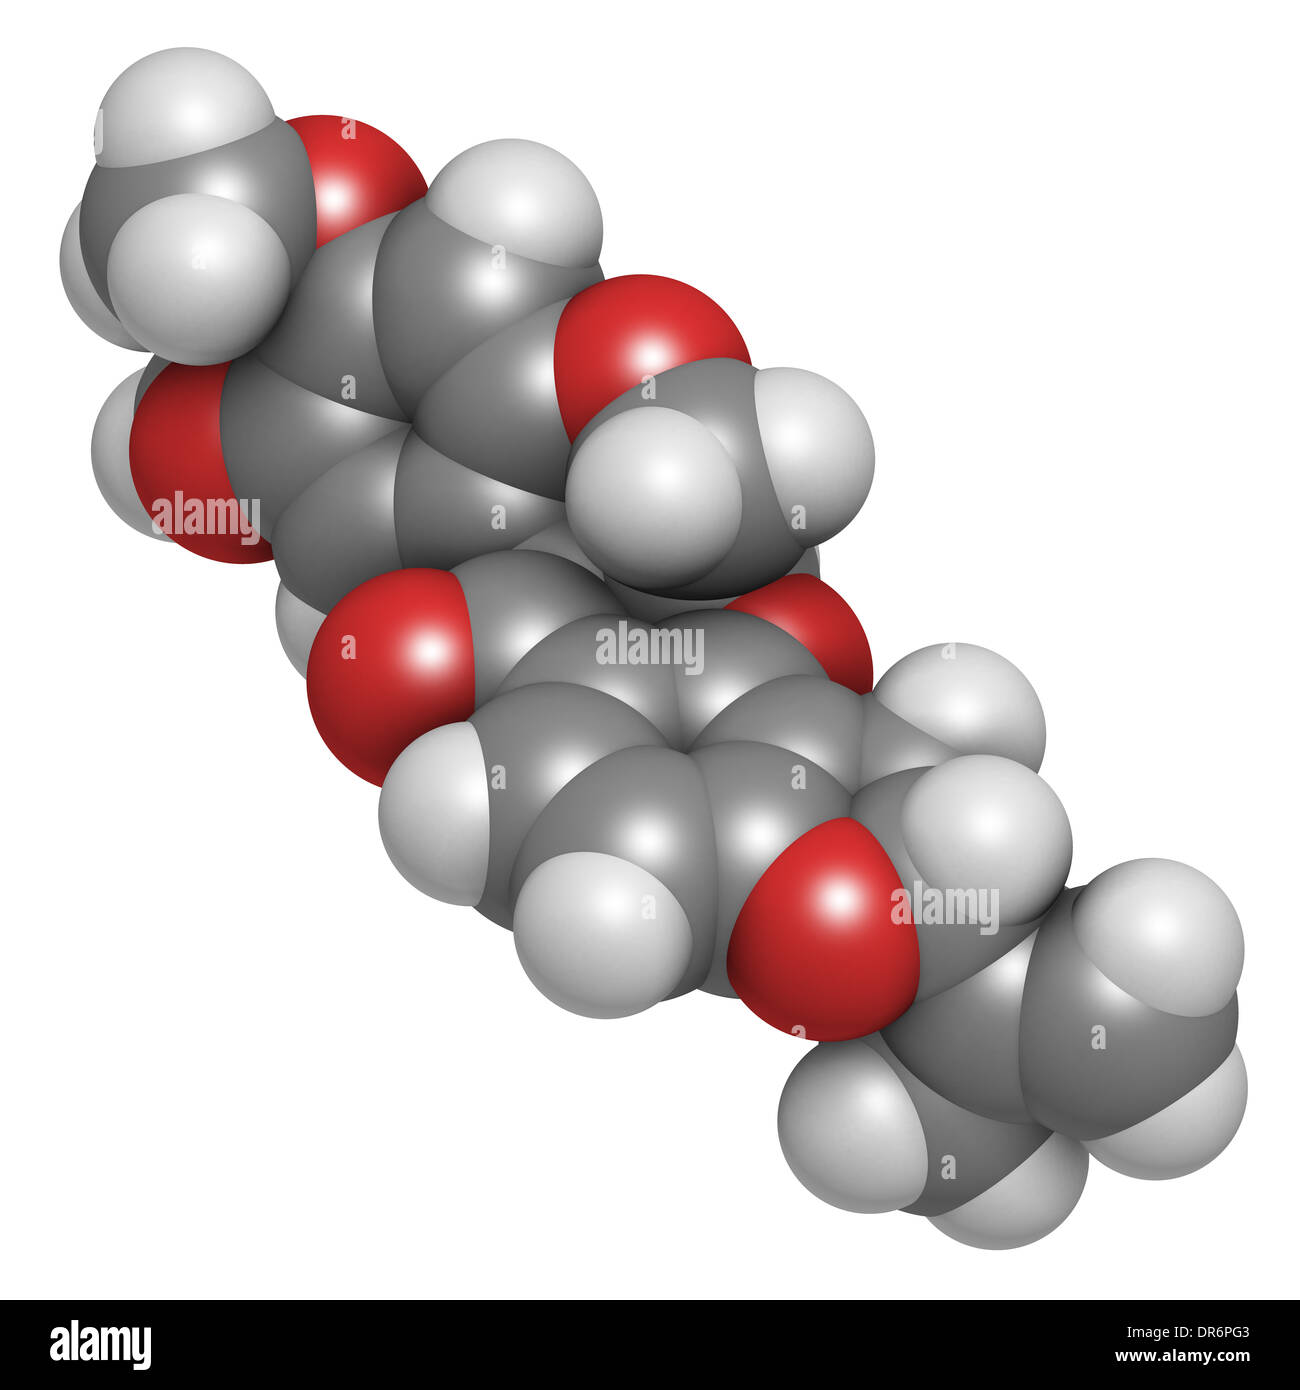 Rotenone broad-spectrum insecticide molecule. Also linked to development of Parkinson’s disease. Stock Photo